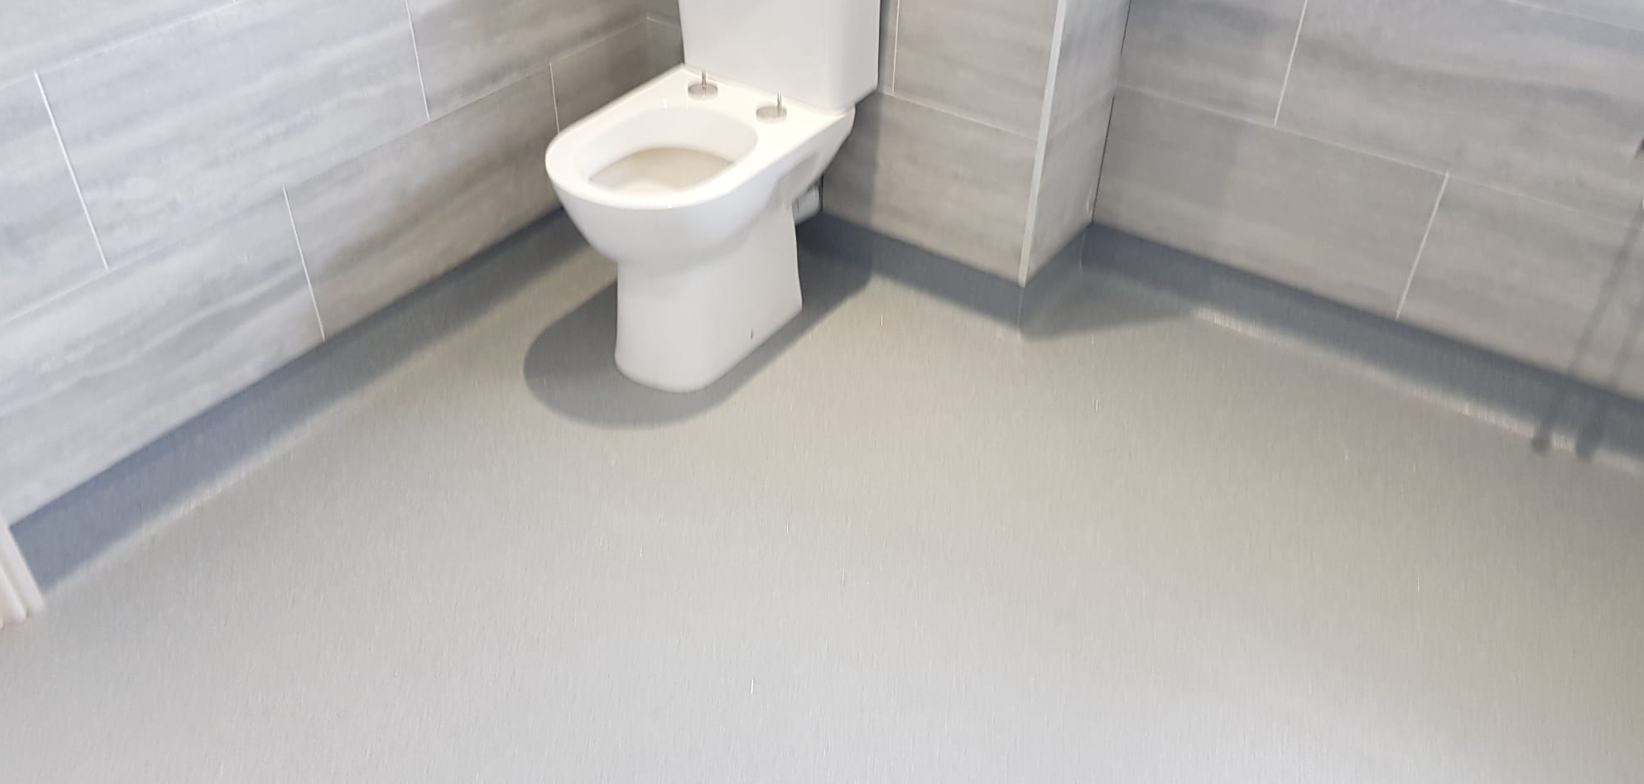 A New flooring in a toilet